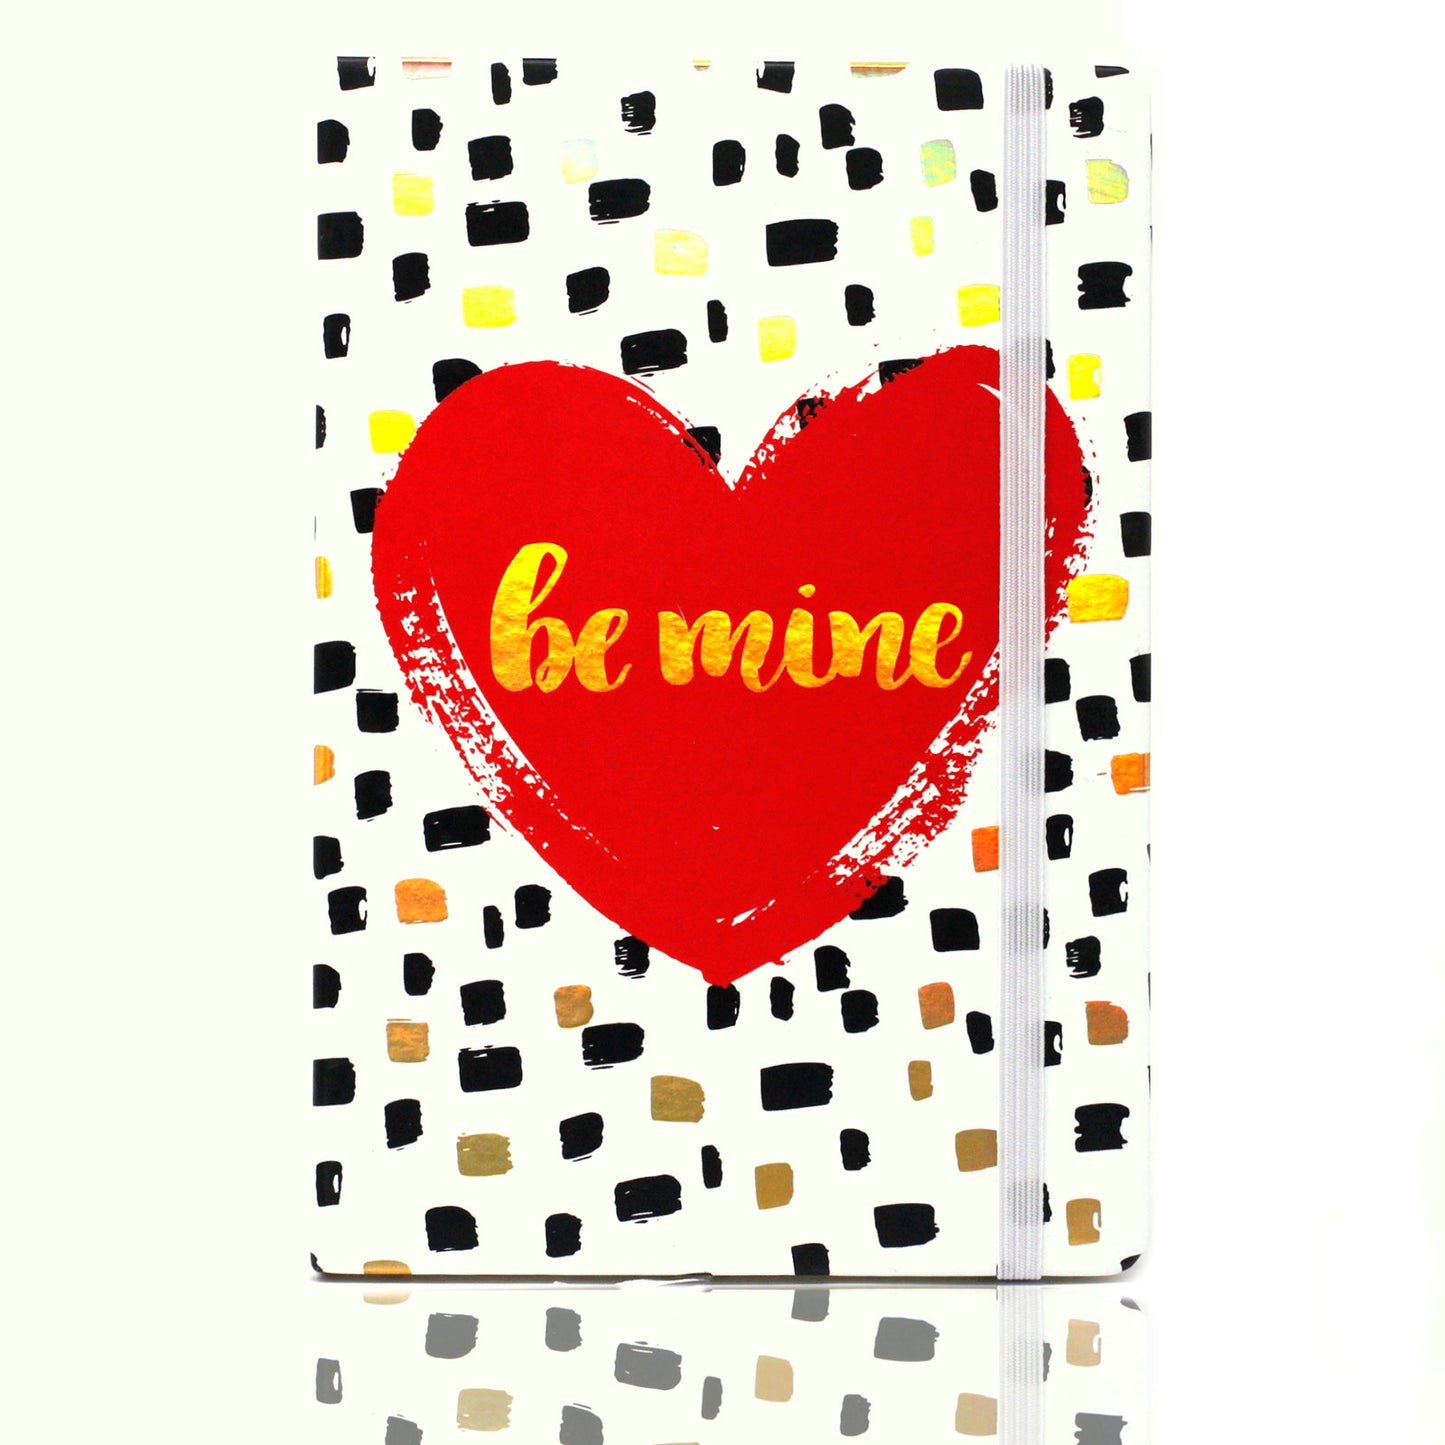 A5 Notebook - Assorted Designs - Funky Love